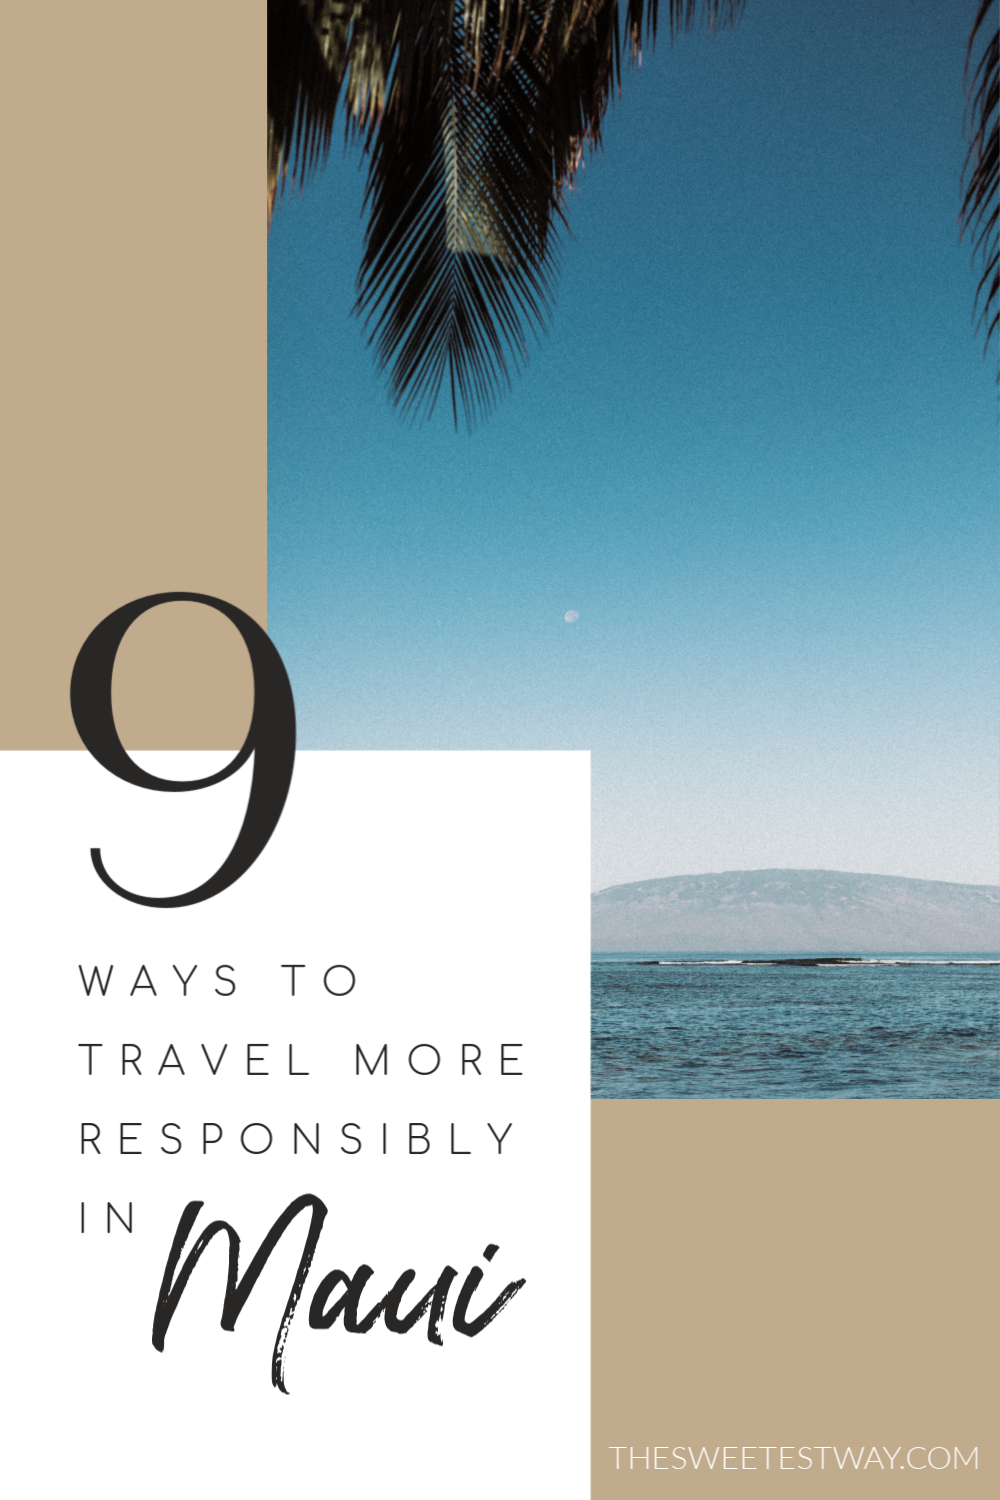 9 ways to travel responsibly in Maui, Hawaii! These tips are useful for traveling just about anywhere. Let's all do our part!!